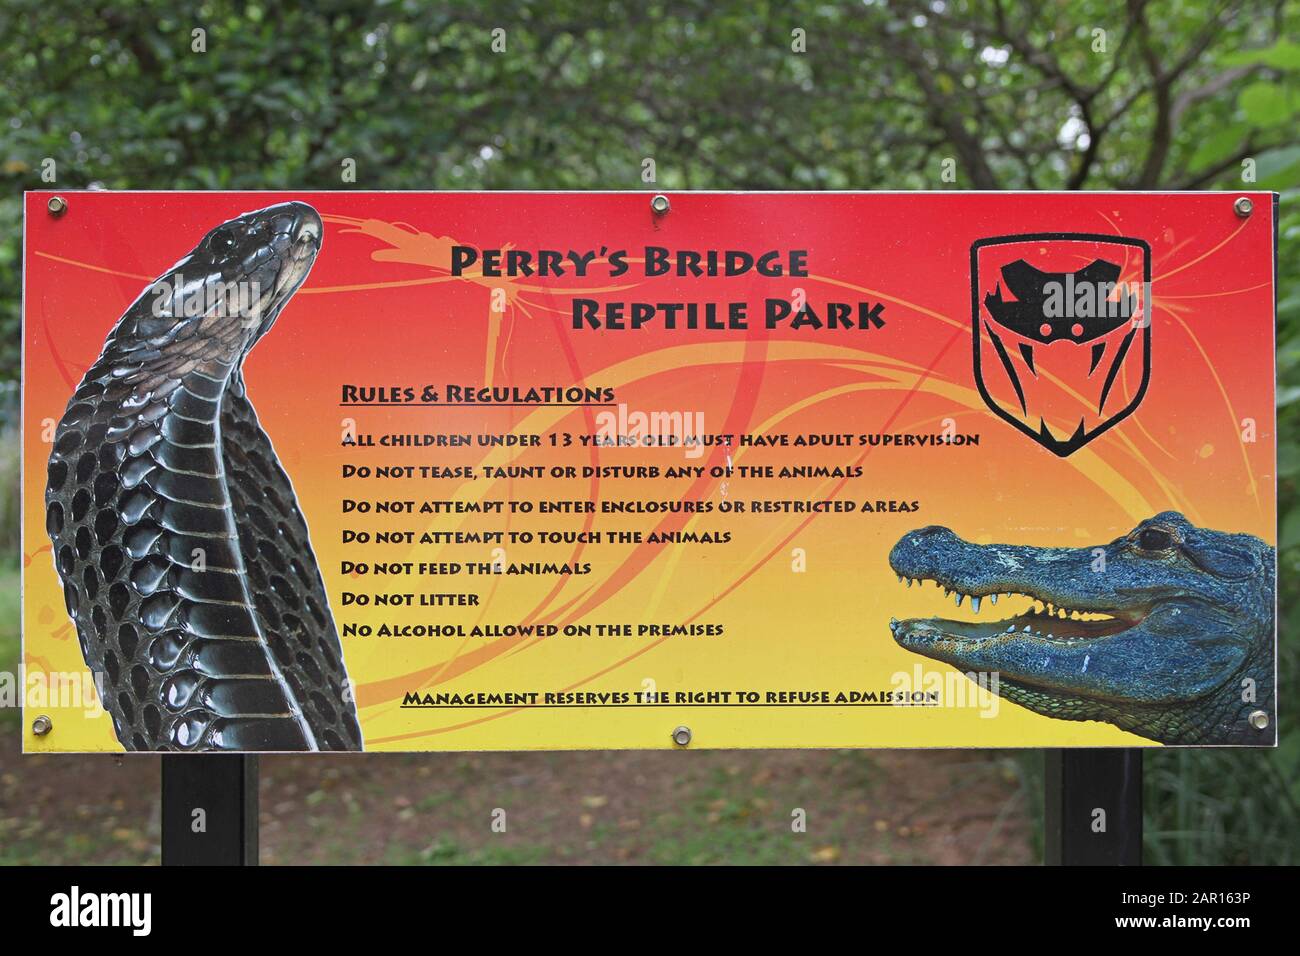 Perry's Bridge Reptile Park sign with rules and regulations and management reserves, Mpumalanga, South Africa. Stock Photo